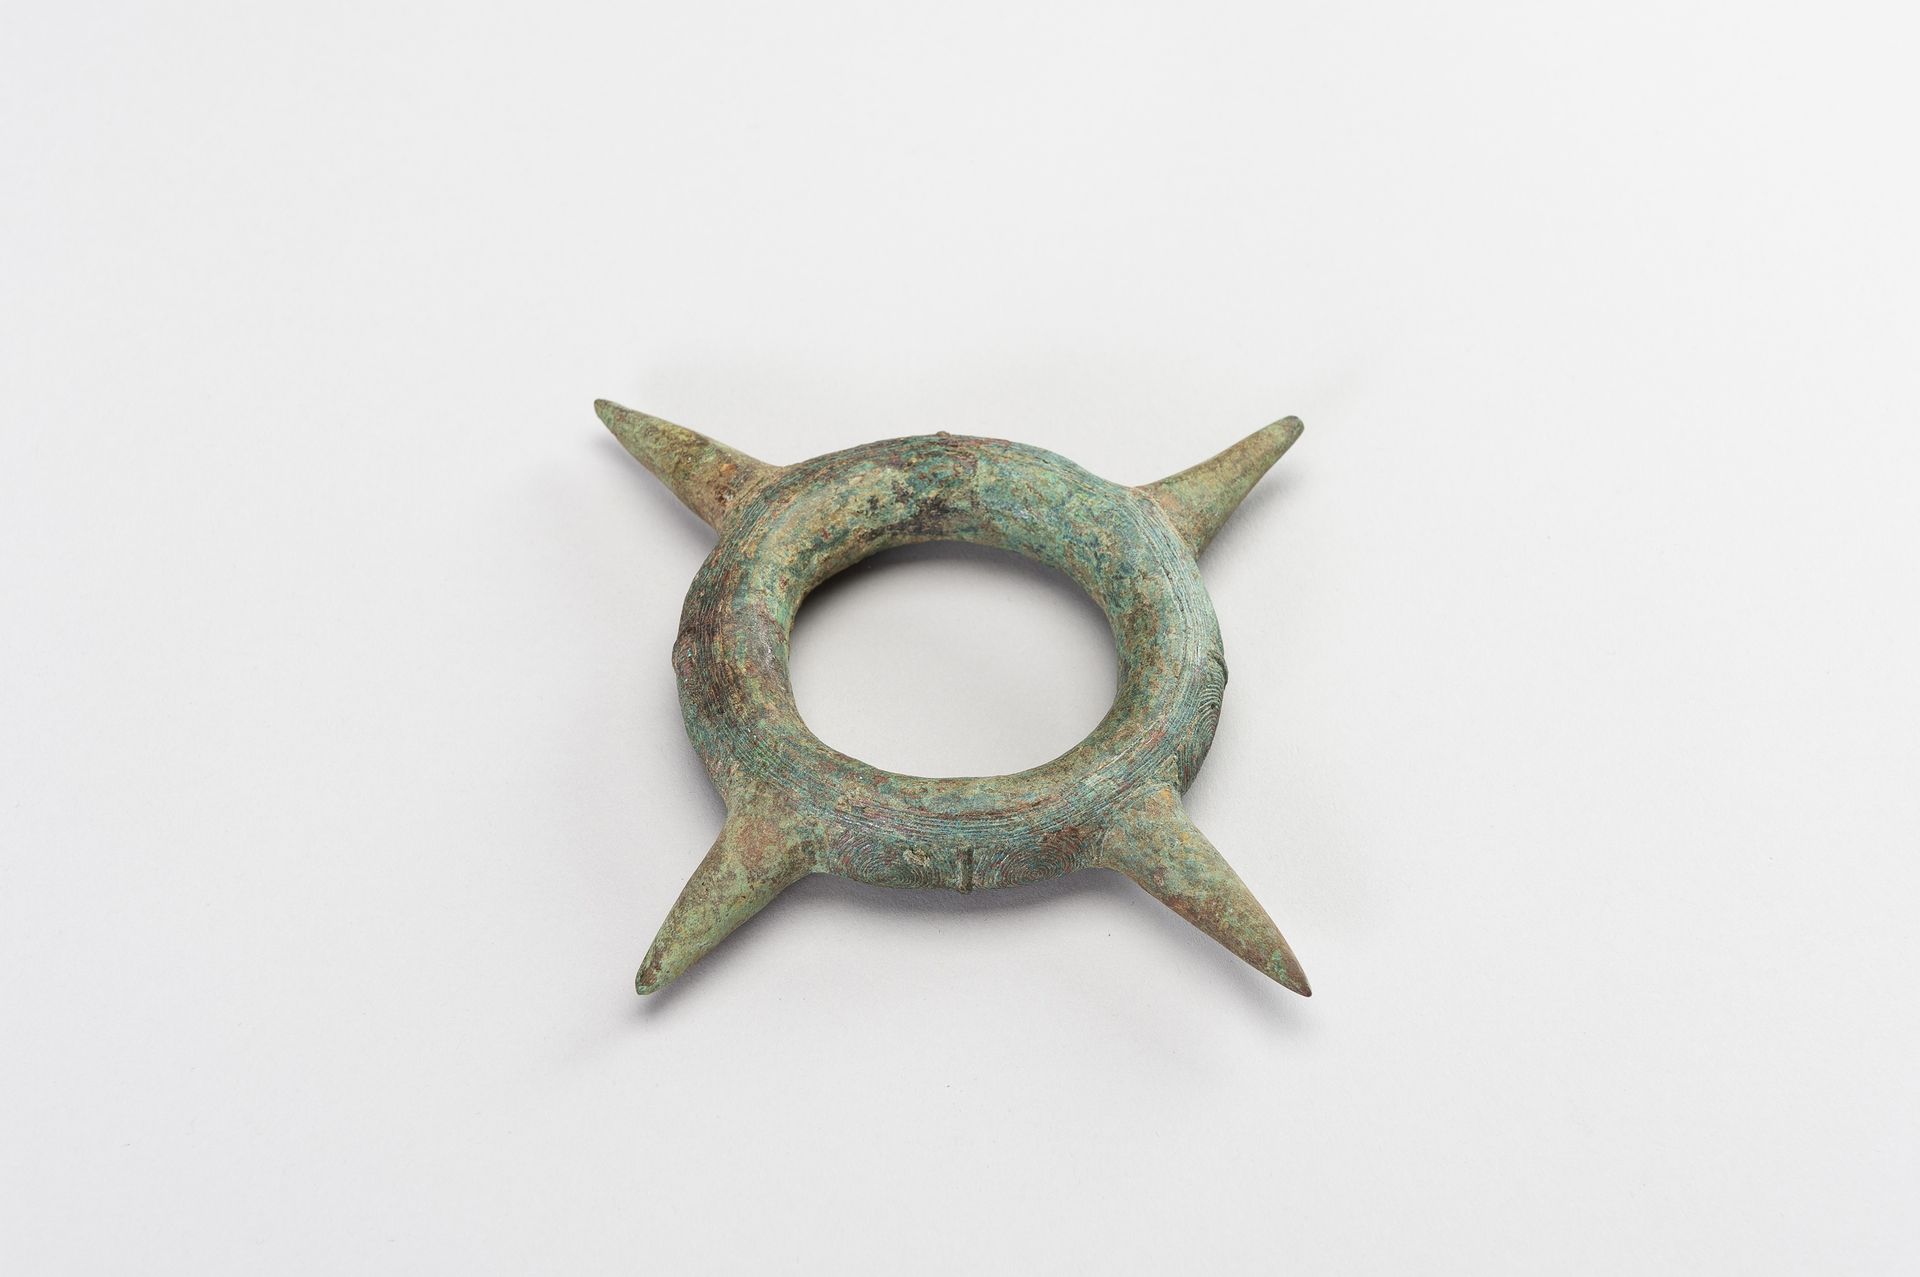 A BRONZE BANGLE WITH SPIKES A BRONZE BANGLE WITH SPIKES
Cina meridionale/Vietnam&hellip;